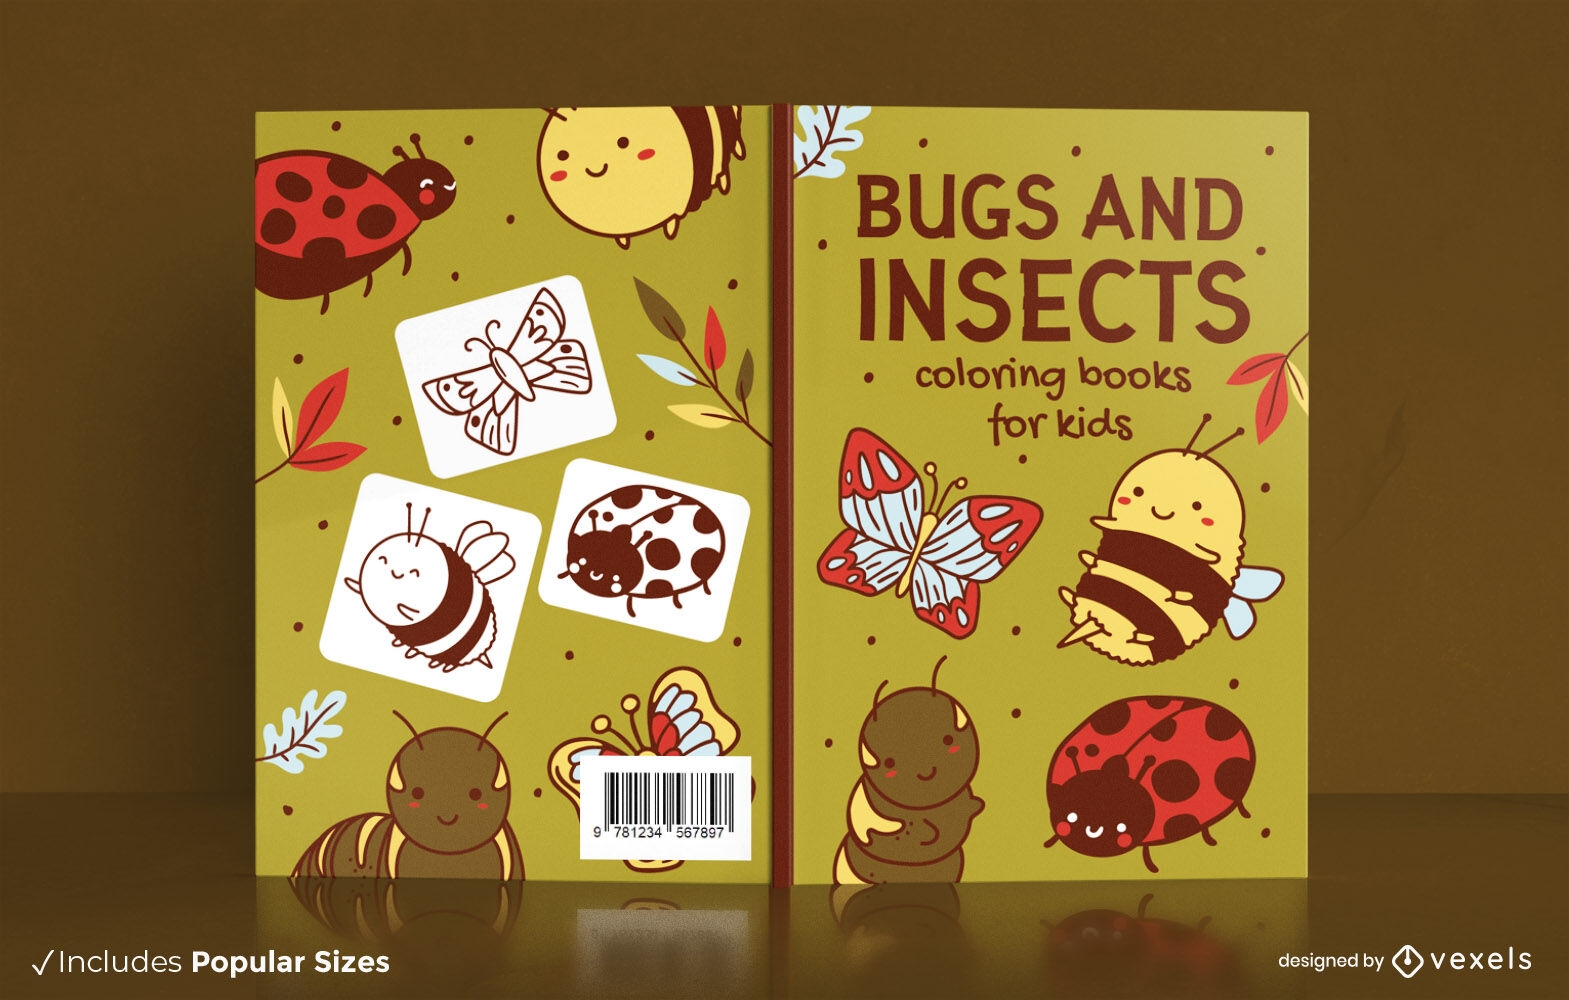 Bugs and insects coloring book cover design